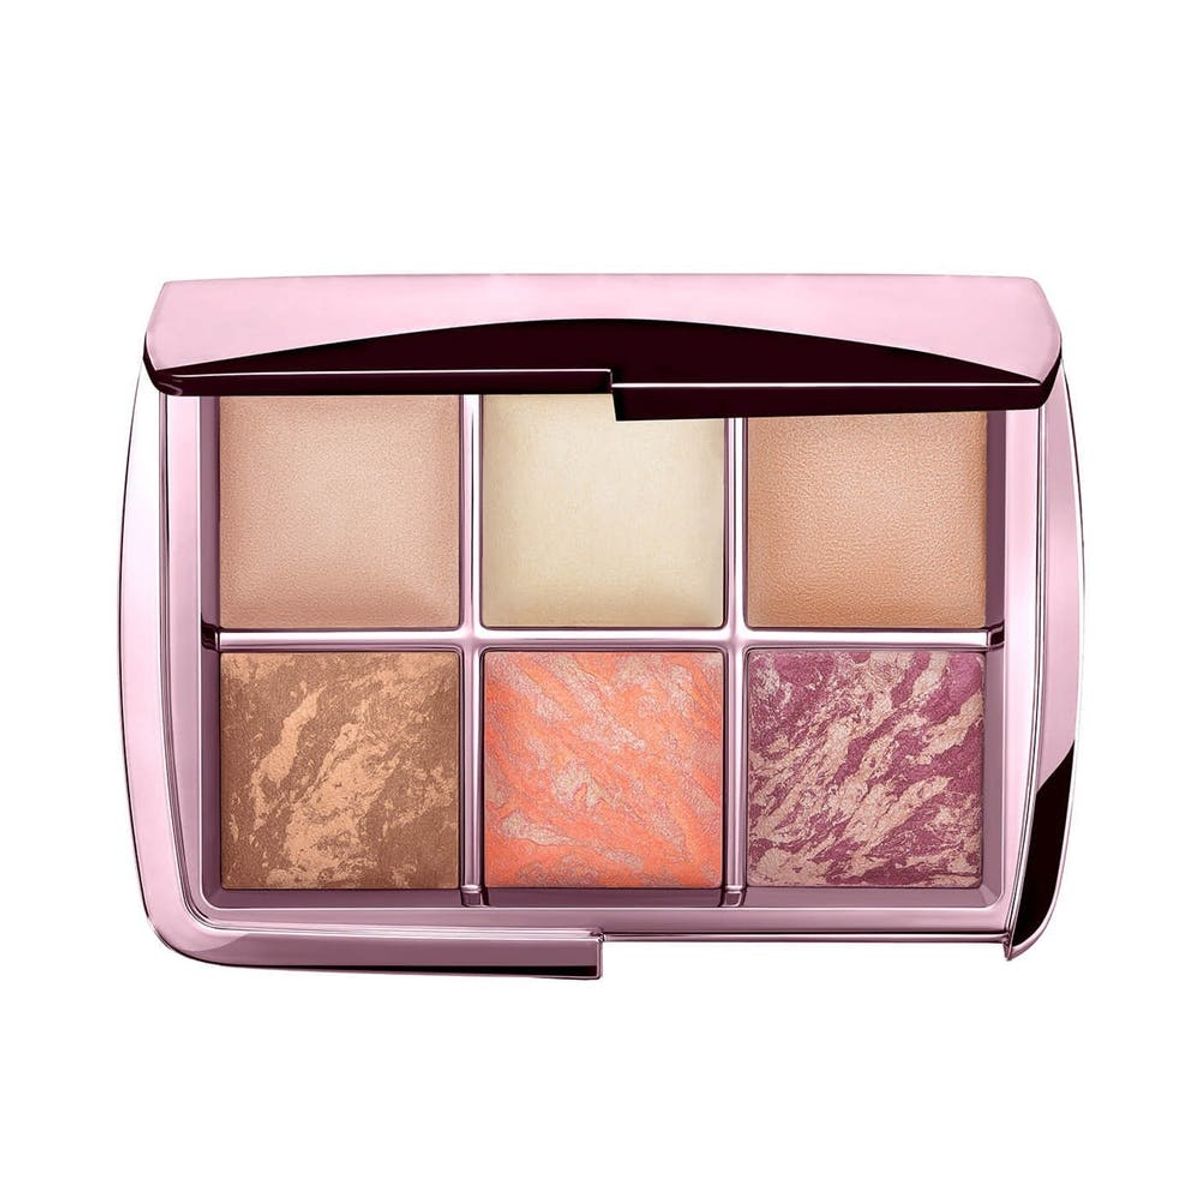 13 All-in-One Palettes to Slay a Festive #MOTD